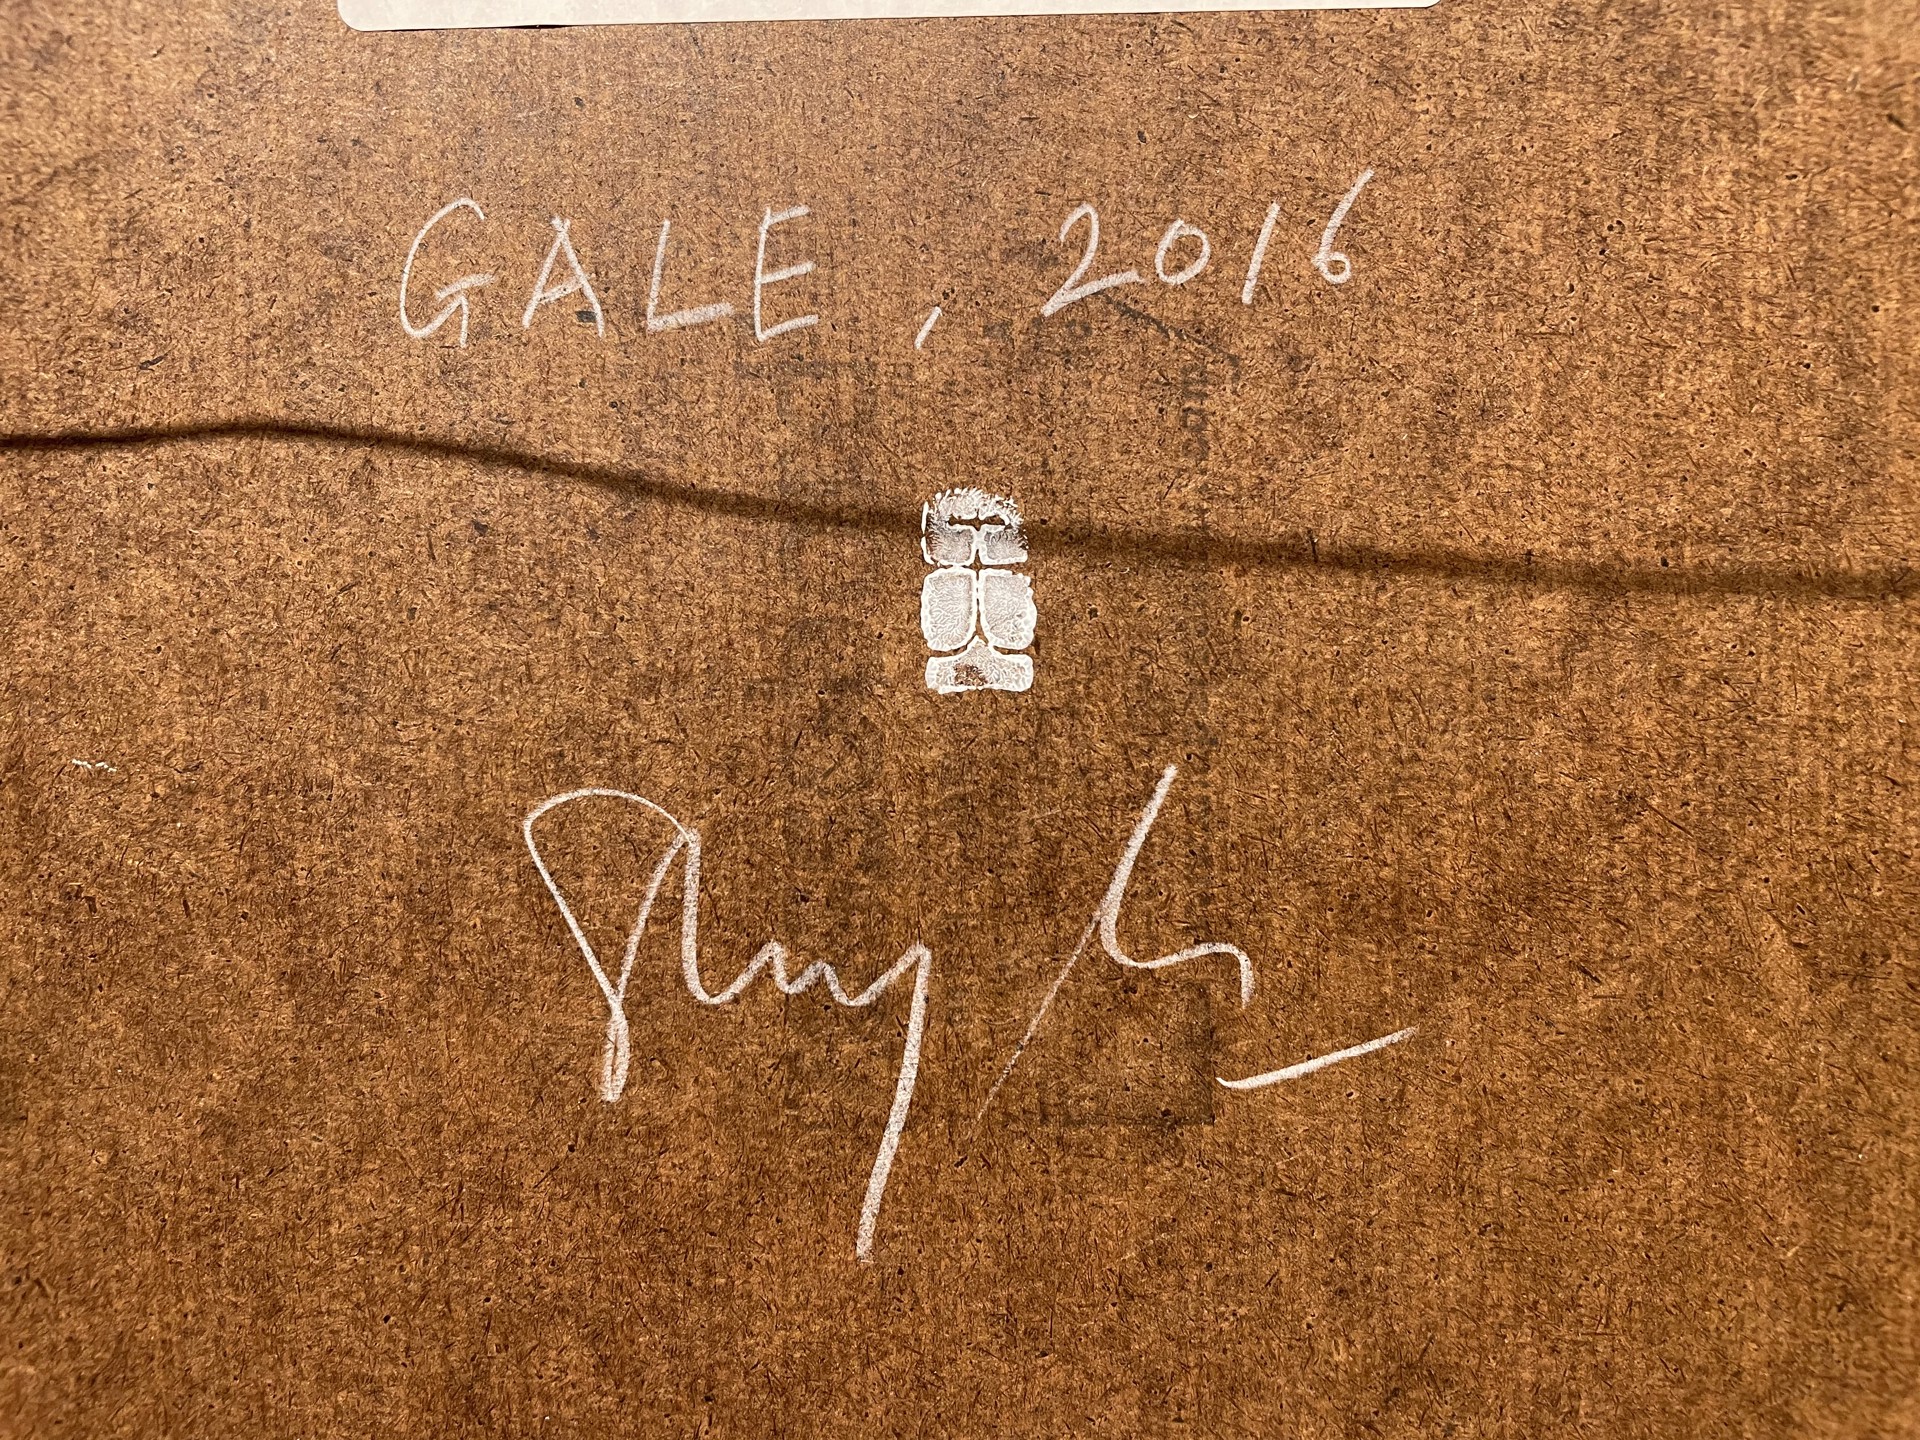 Gale by Sky Power